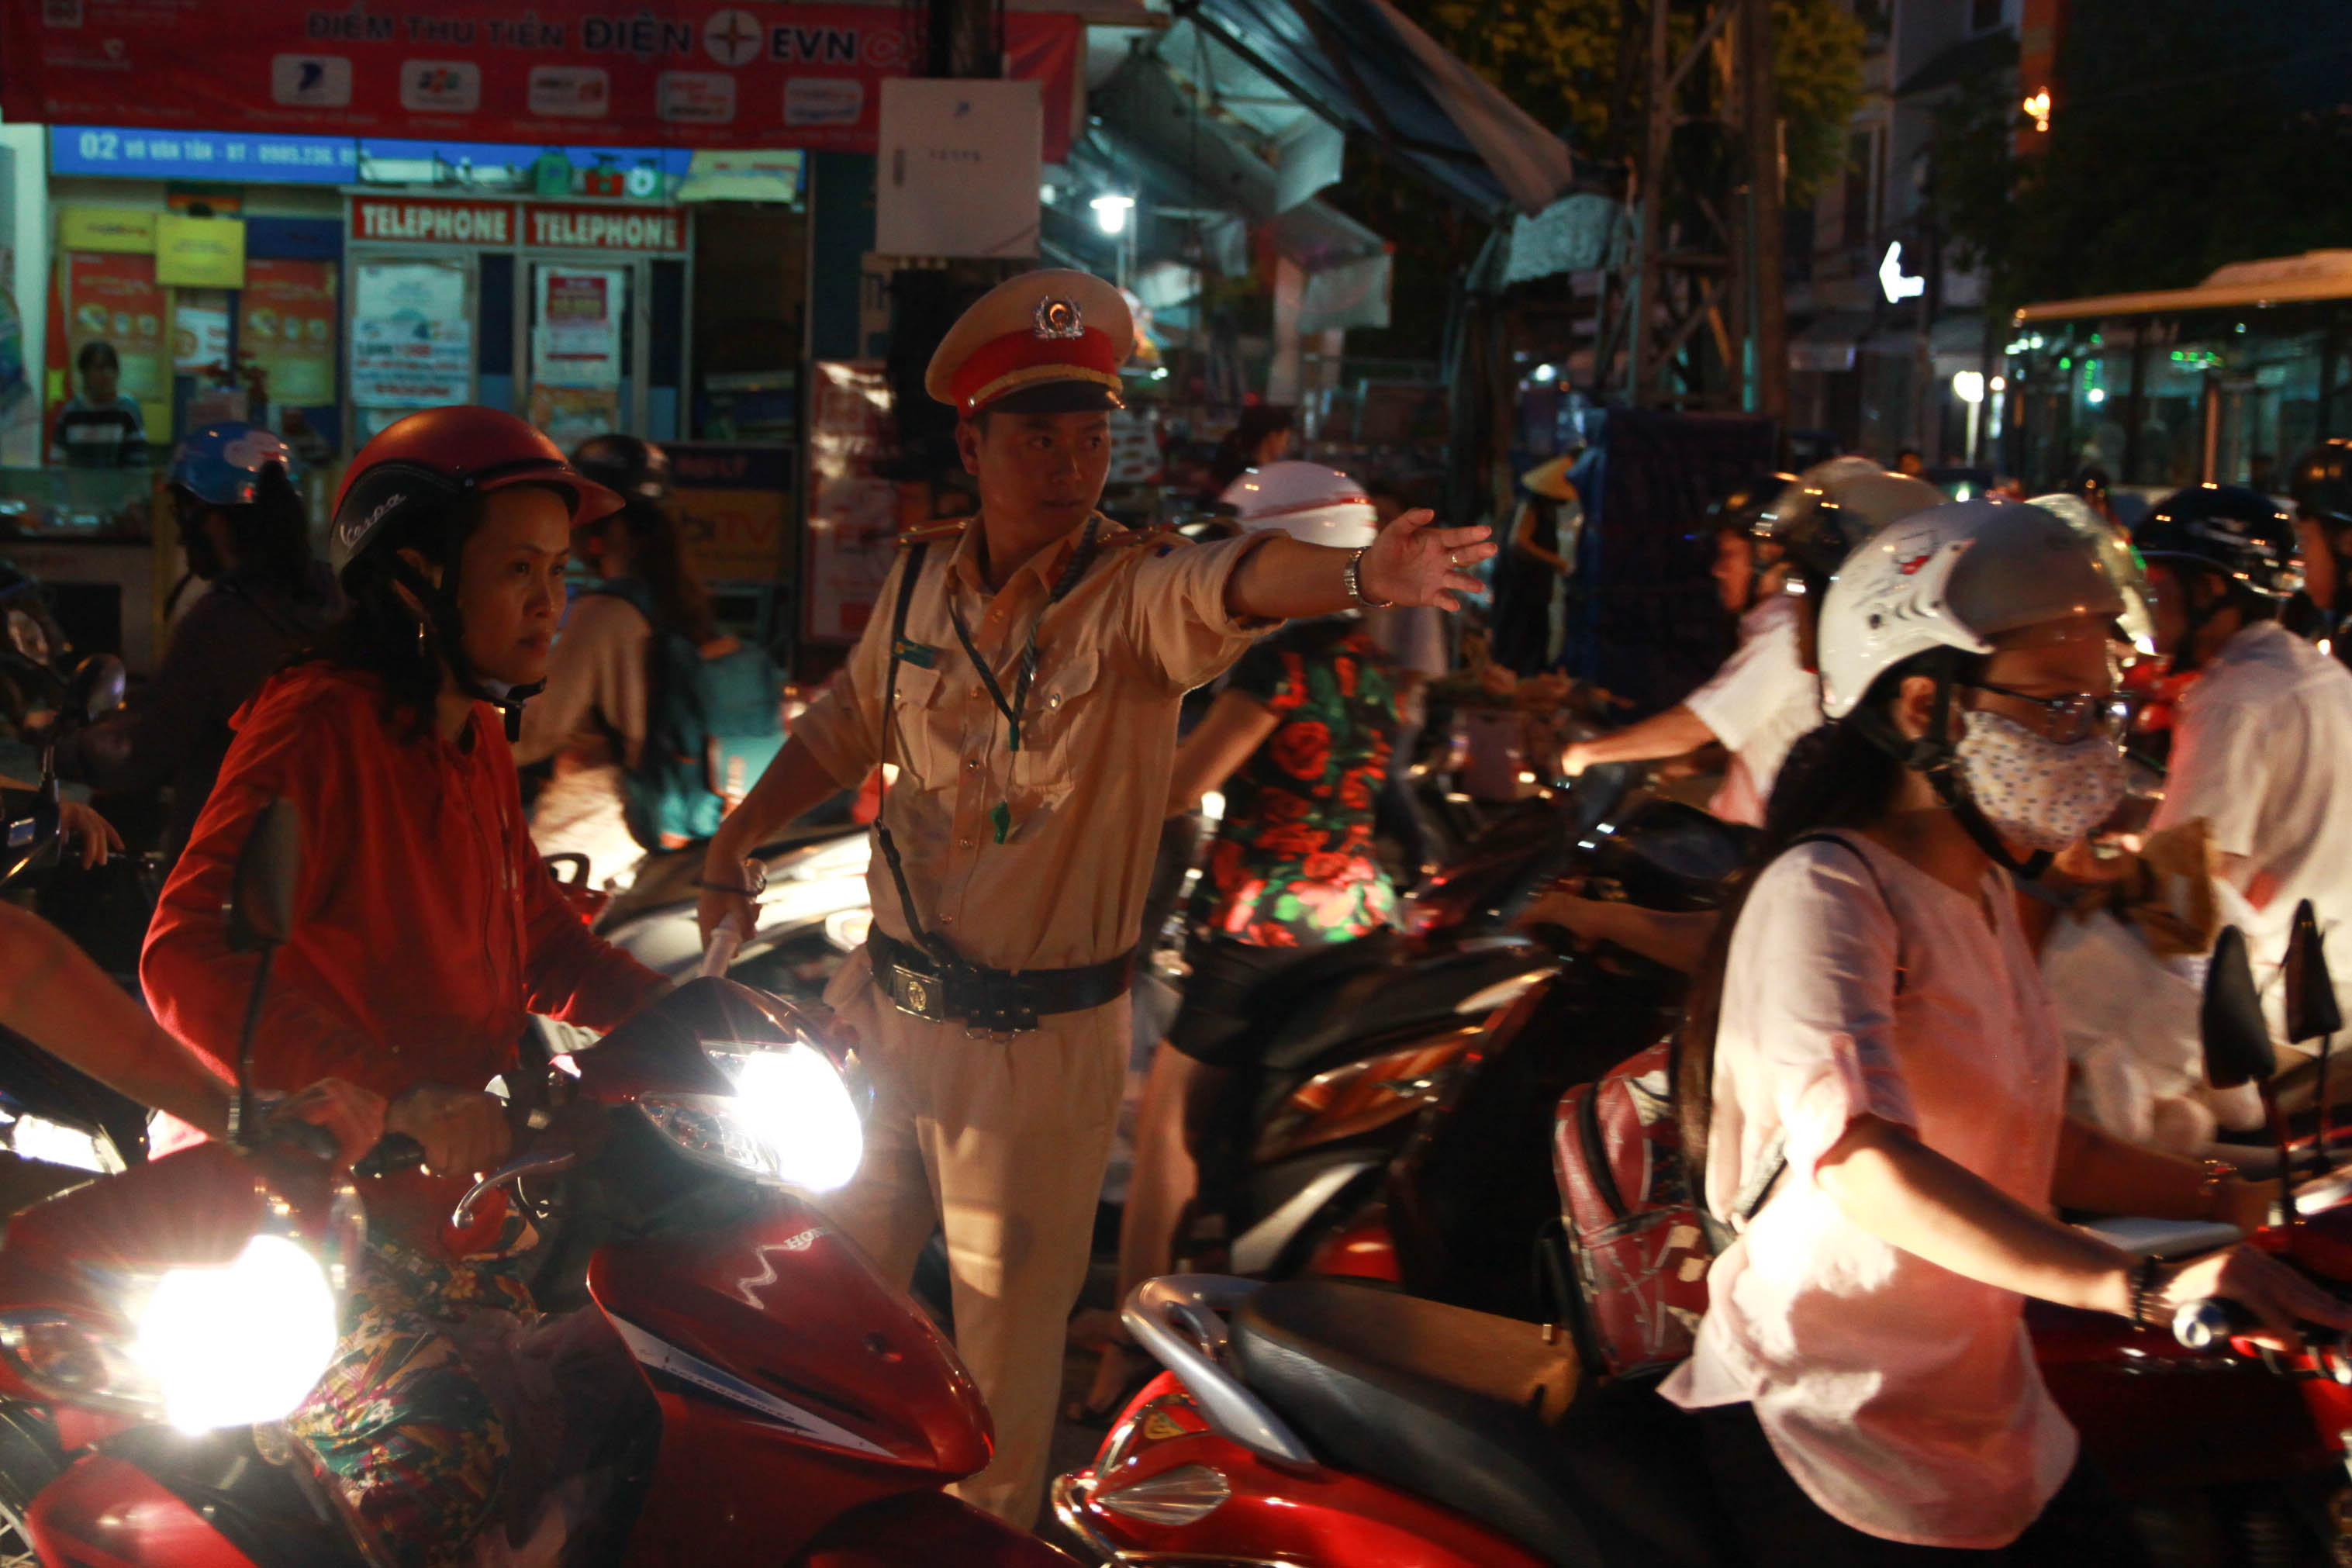 A traffic police officer directs rush hour traffic in Da Nang City. Photo: Tuoi Tre